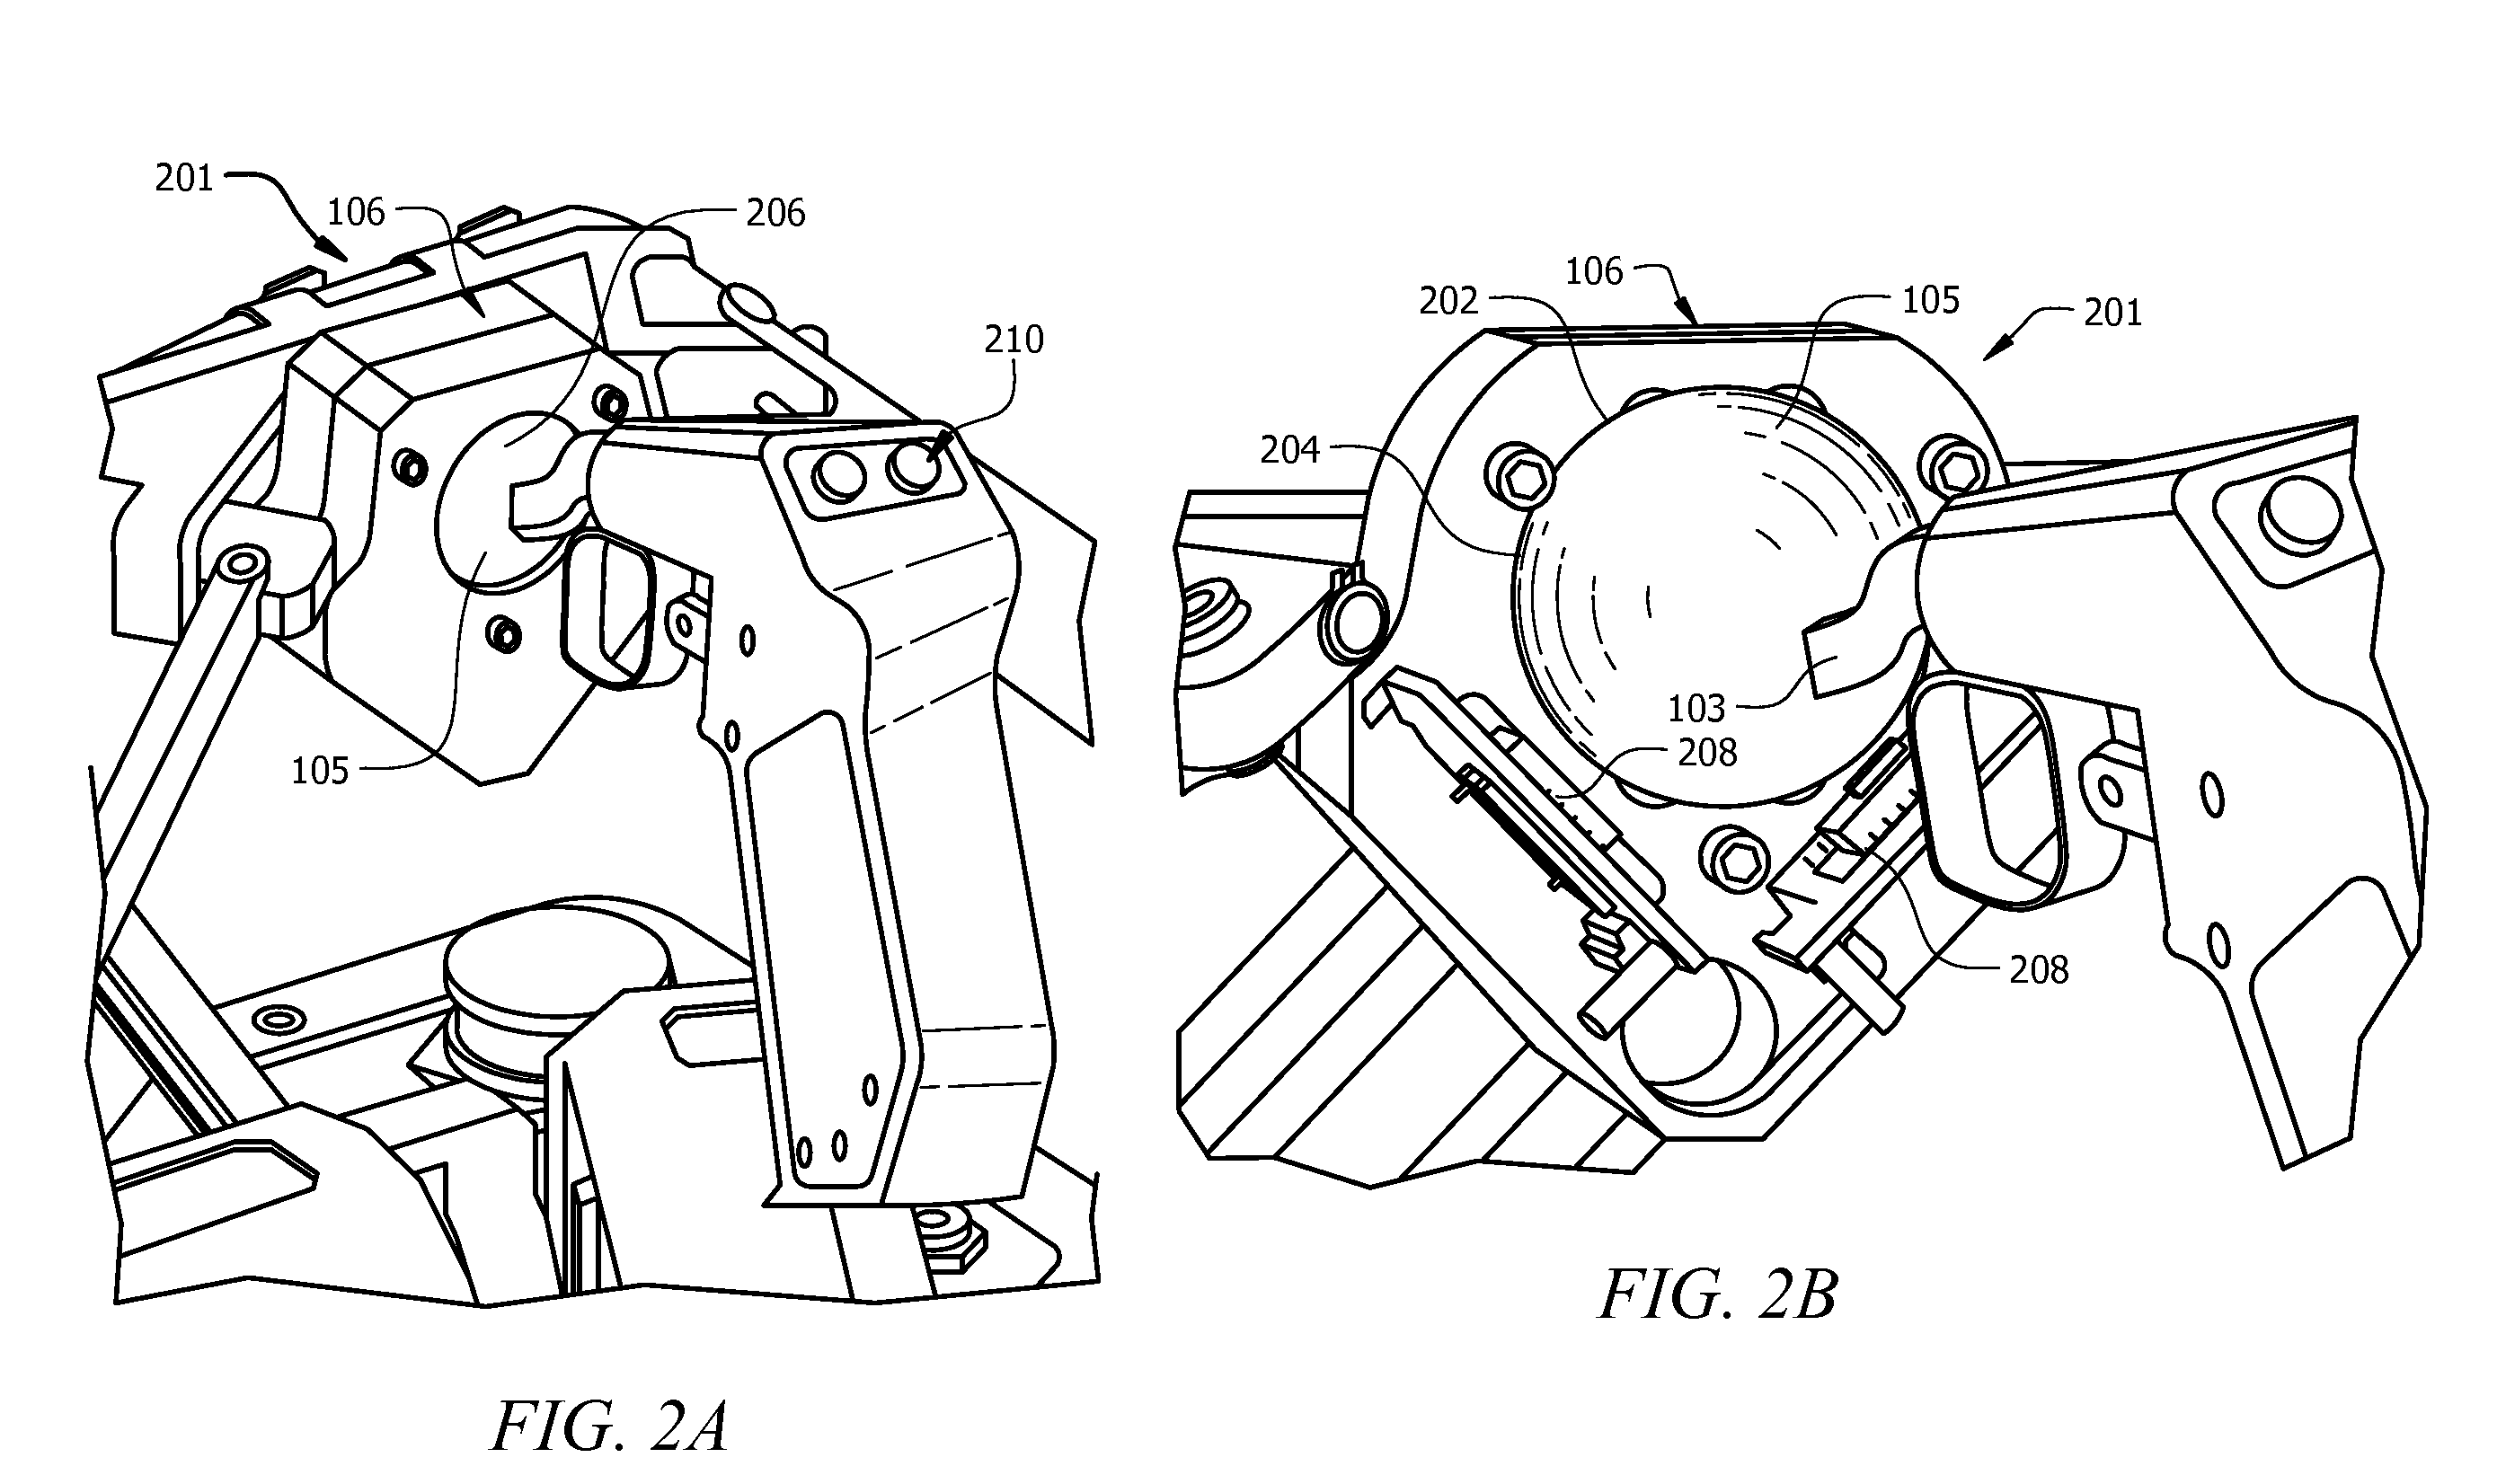 Haptic manipulation system for wheelchairs